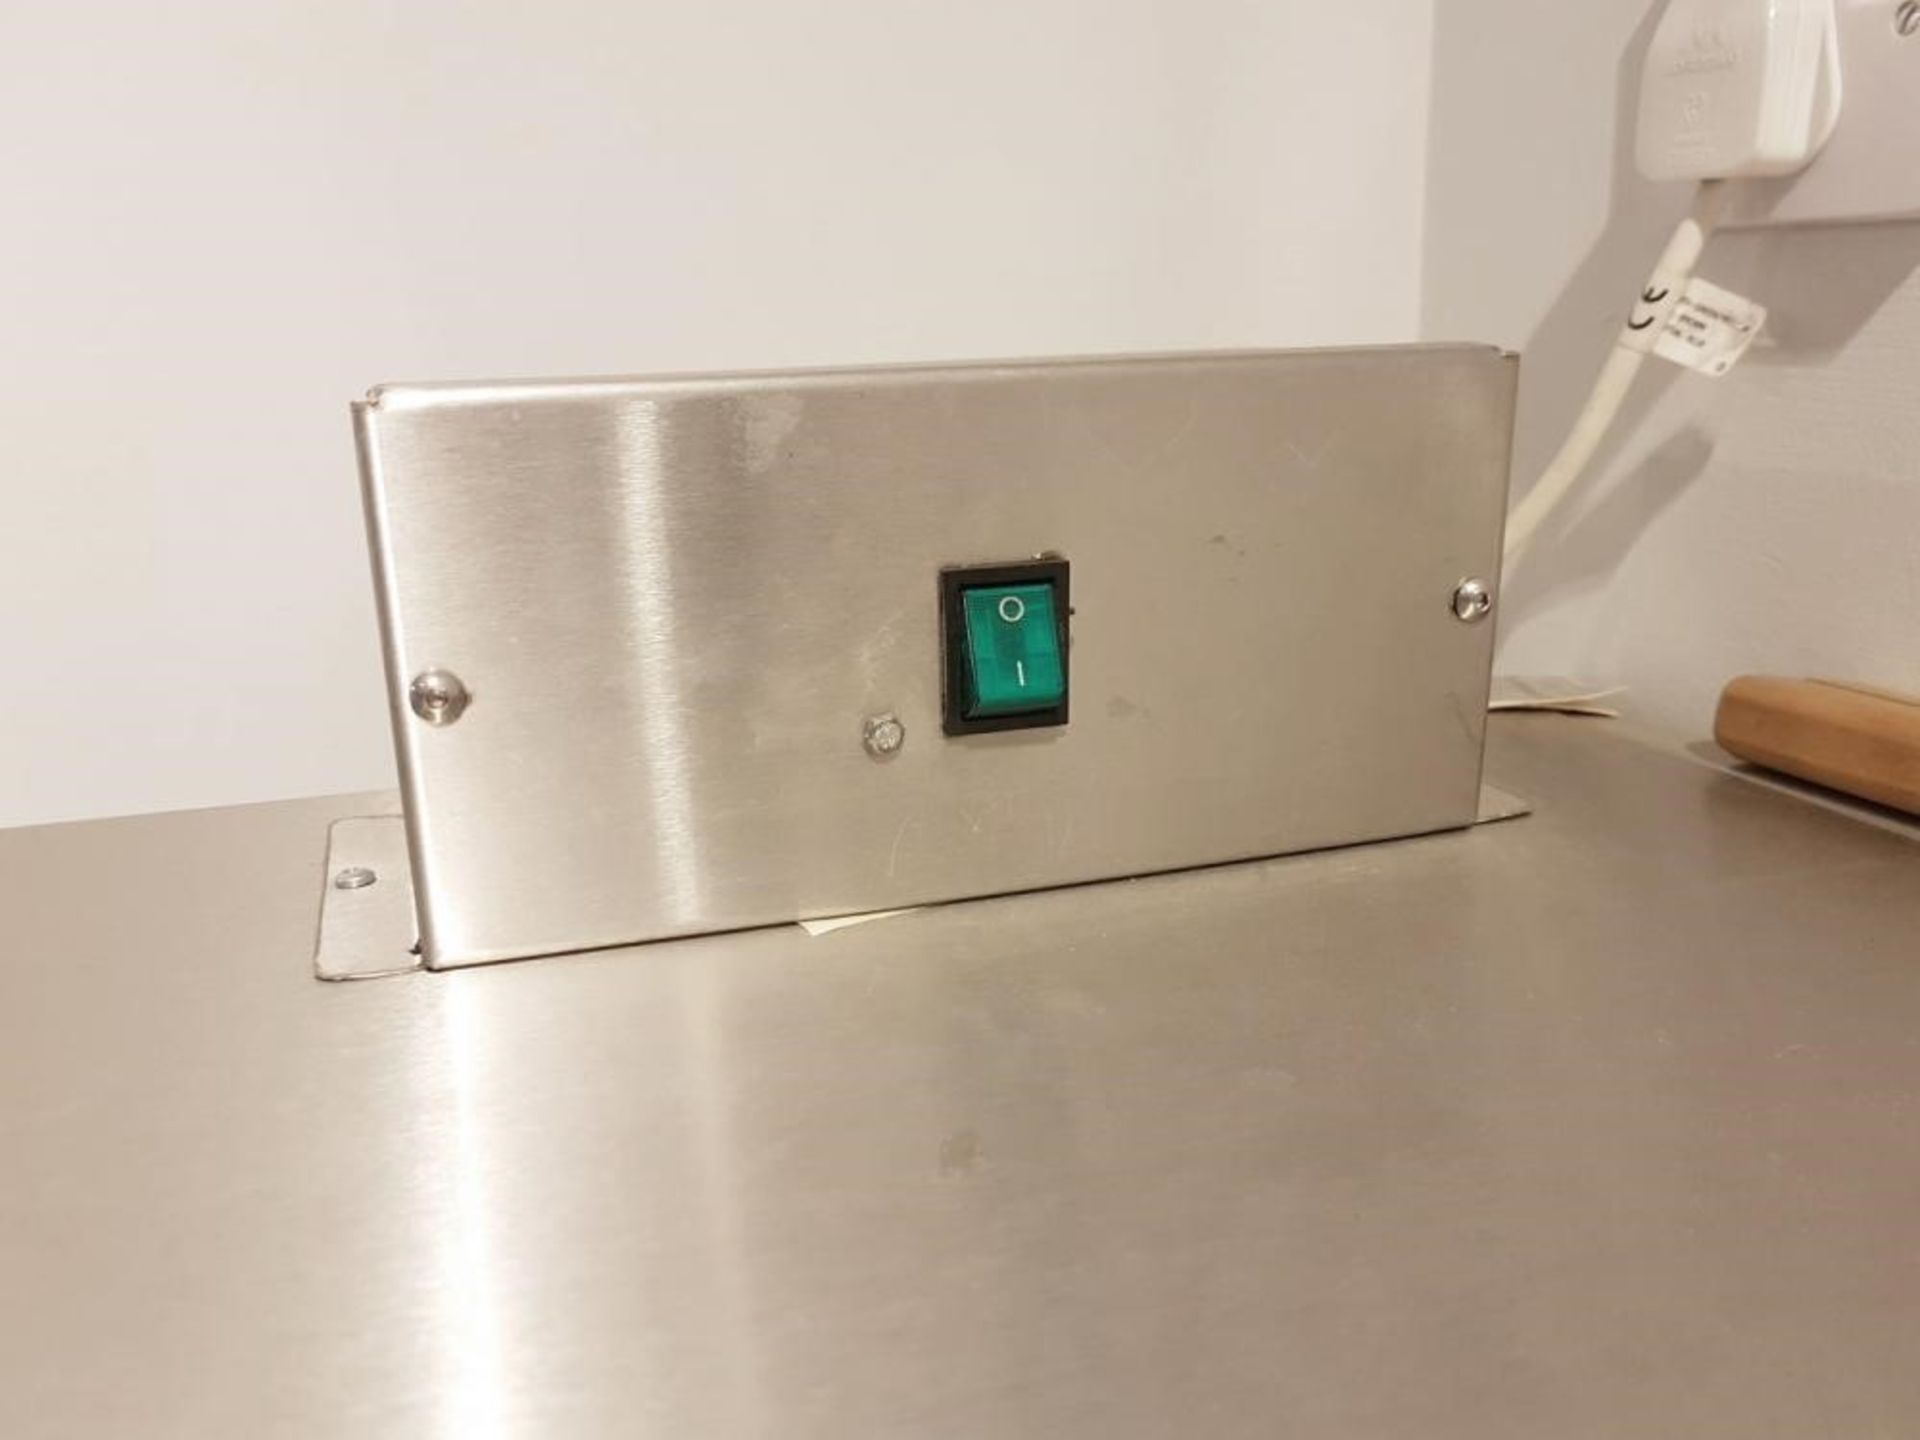 1 x Stainless Steel Ambient Counter - Around 2 Months Old In Great Condition - Dimensions: W368.5 x - Image 2 of 4